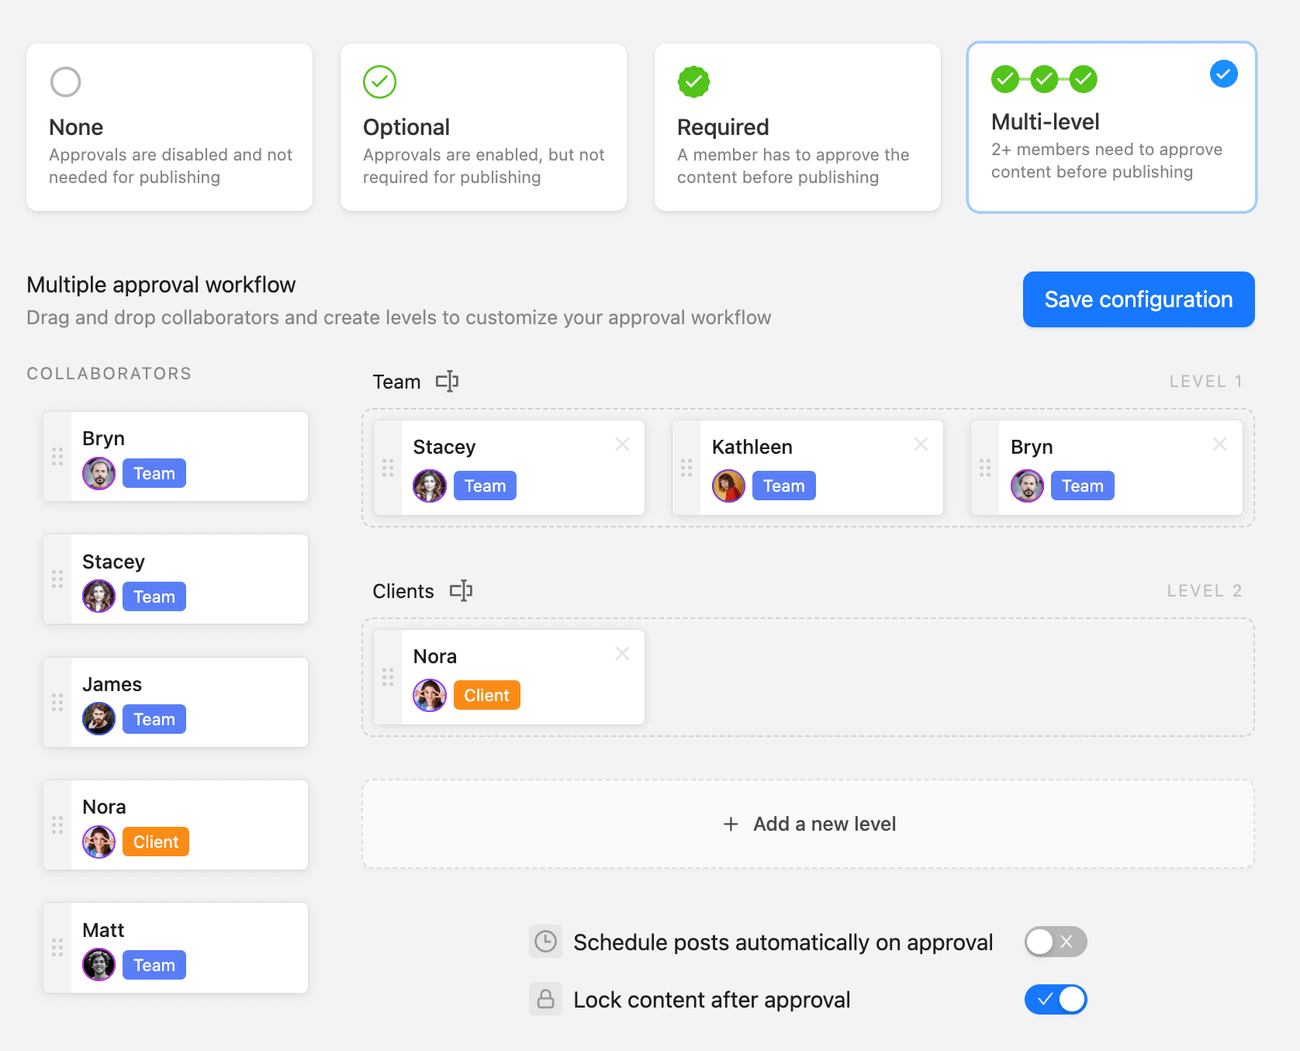 Content approval settings in Planable for a multi-level workflow, showing team and client collaborators, approval options, and scheduling and locking content features.